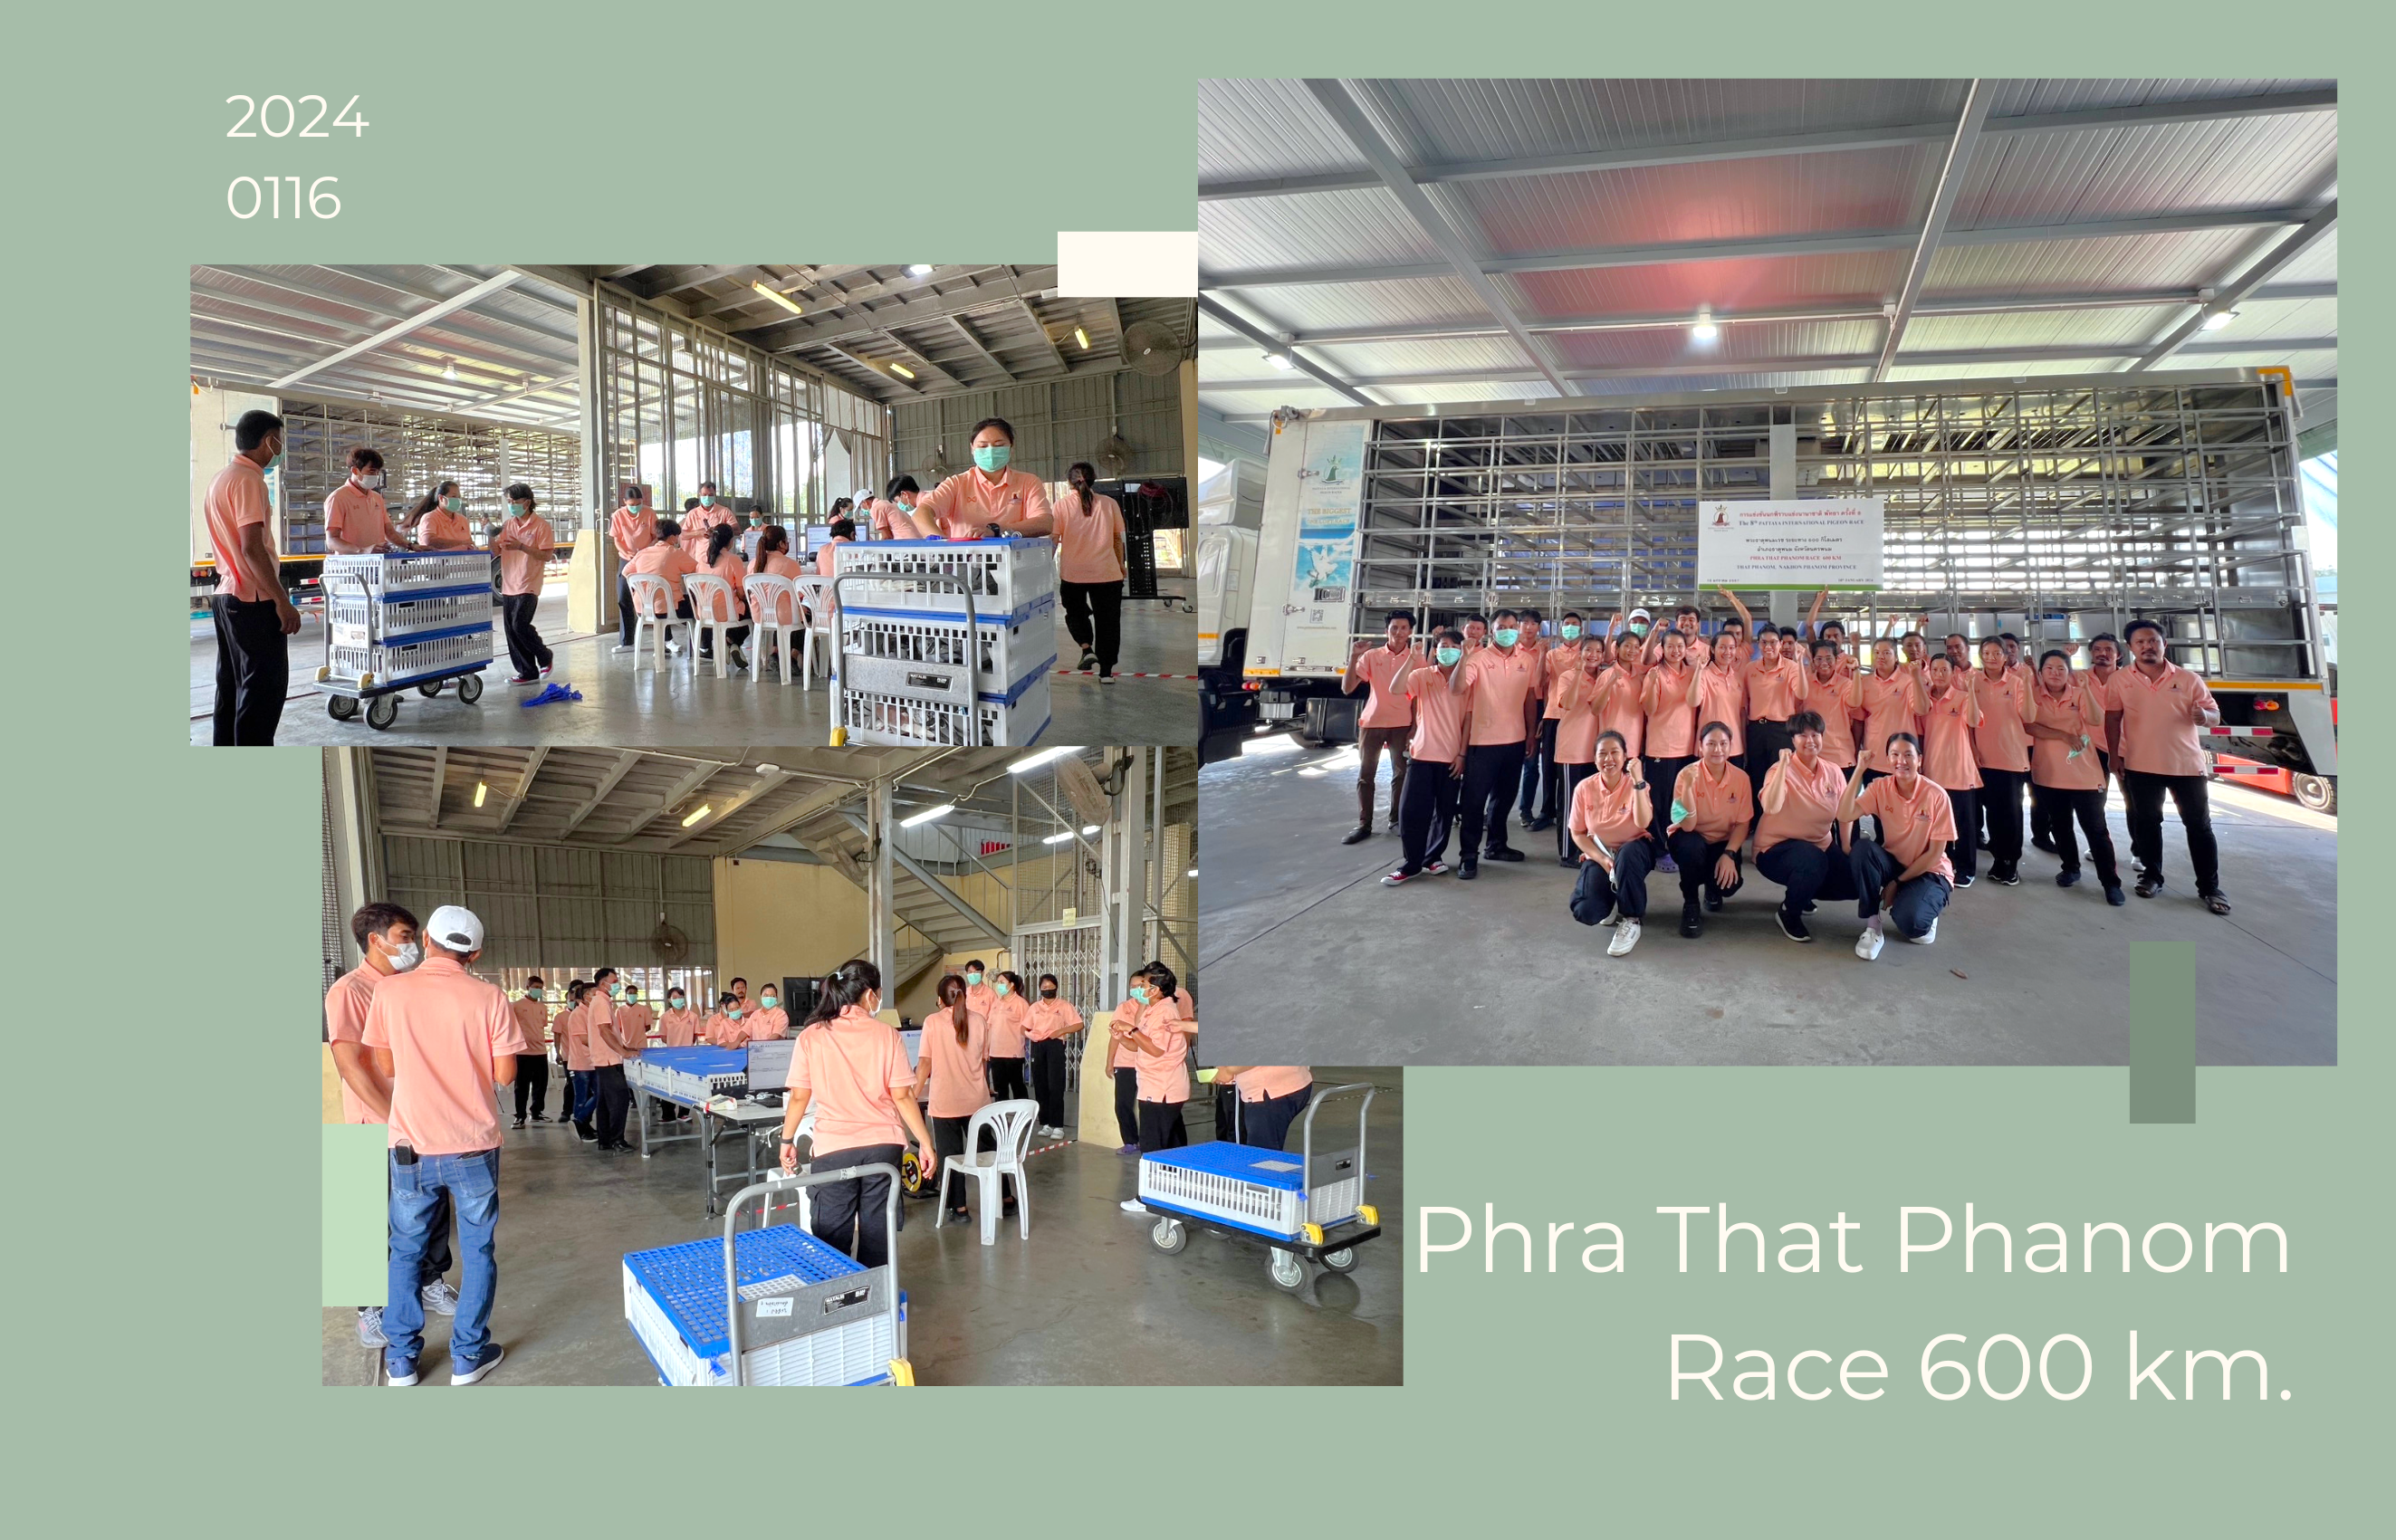 The 8th PIPR : PHRA THAT PHANOM RACE 600 KM.